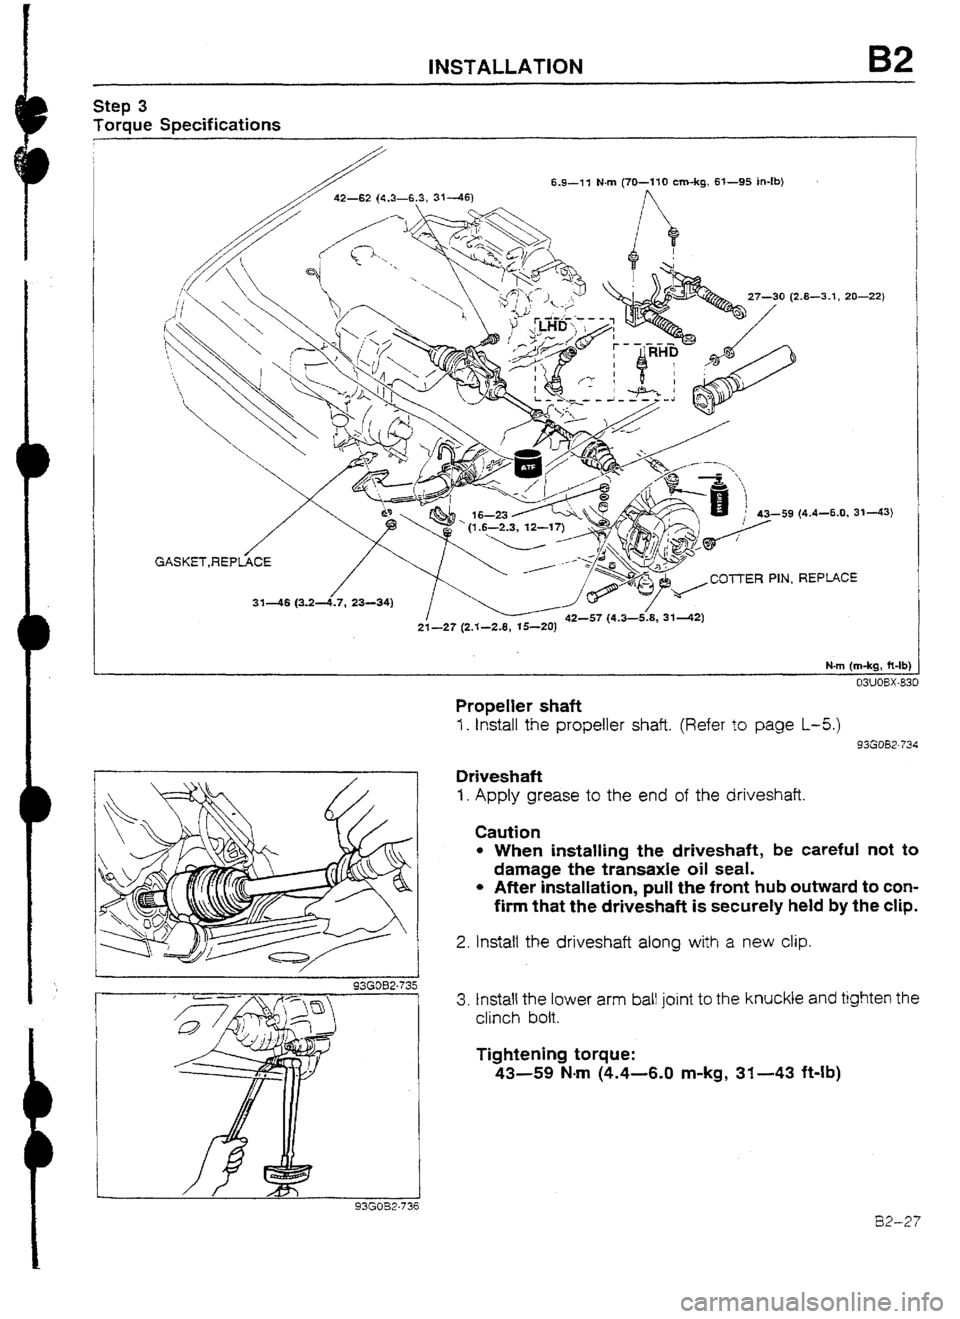 MAZDA 232 1990  Workshop Manual Suplement INSTALLATION 
step 3 
Torque Specifications 
6.9-11 Nn-i (70-110 cm-kg, 6l--95 in-lb) 
0 (2.8-3.1, 20-221 
59 (4.4-6.0, 3143) 
GASKET,REPtiCE 
/ 
/ 
31-46 (3.24.7, 23-34) ~//<~~z”““‘” PIN RE